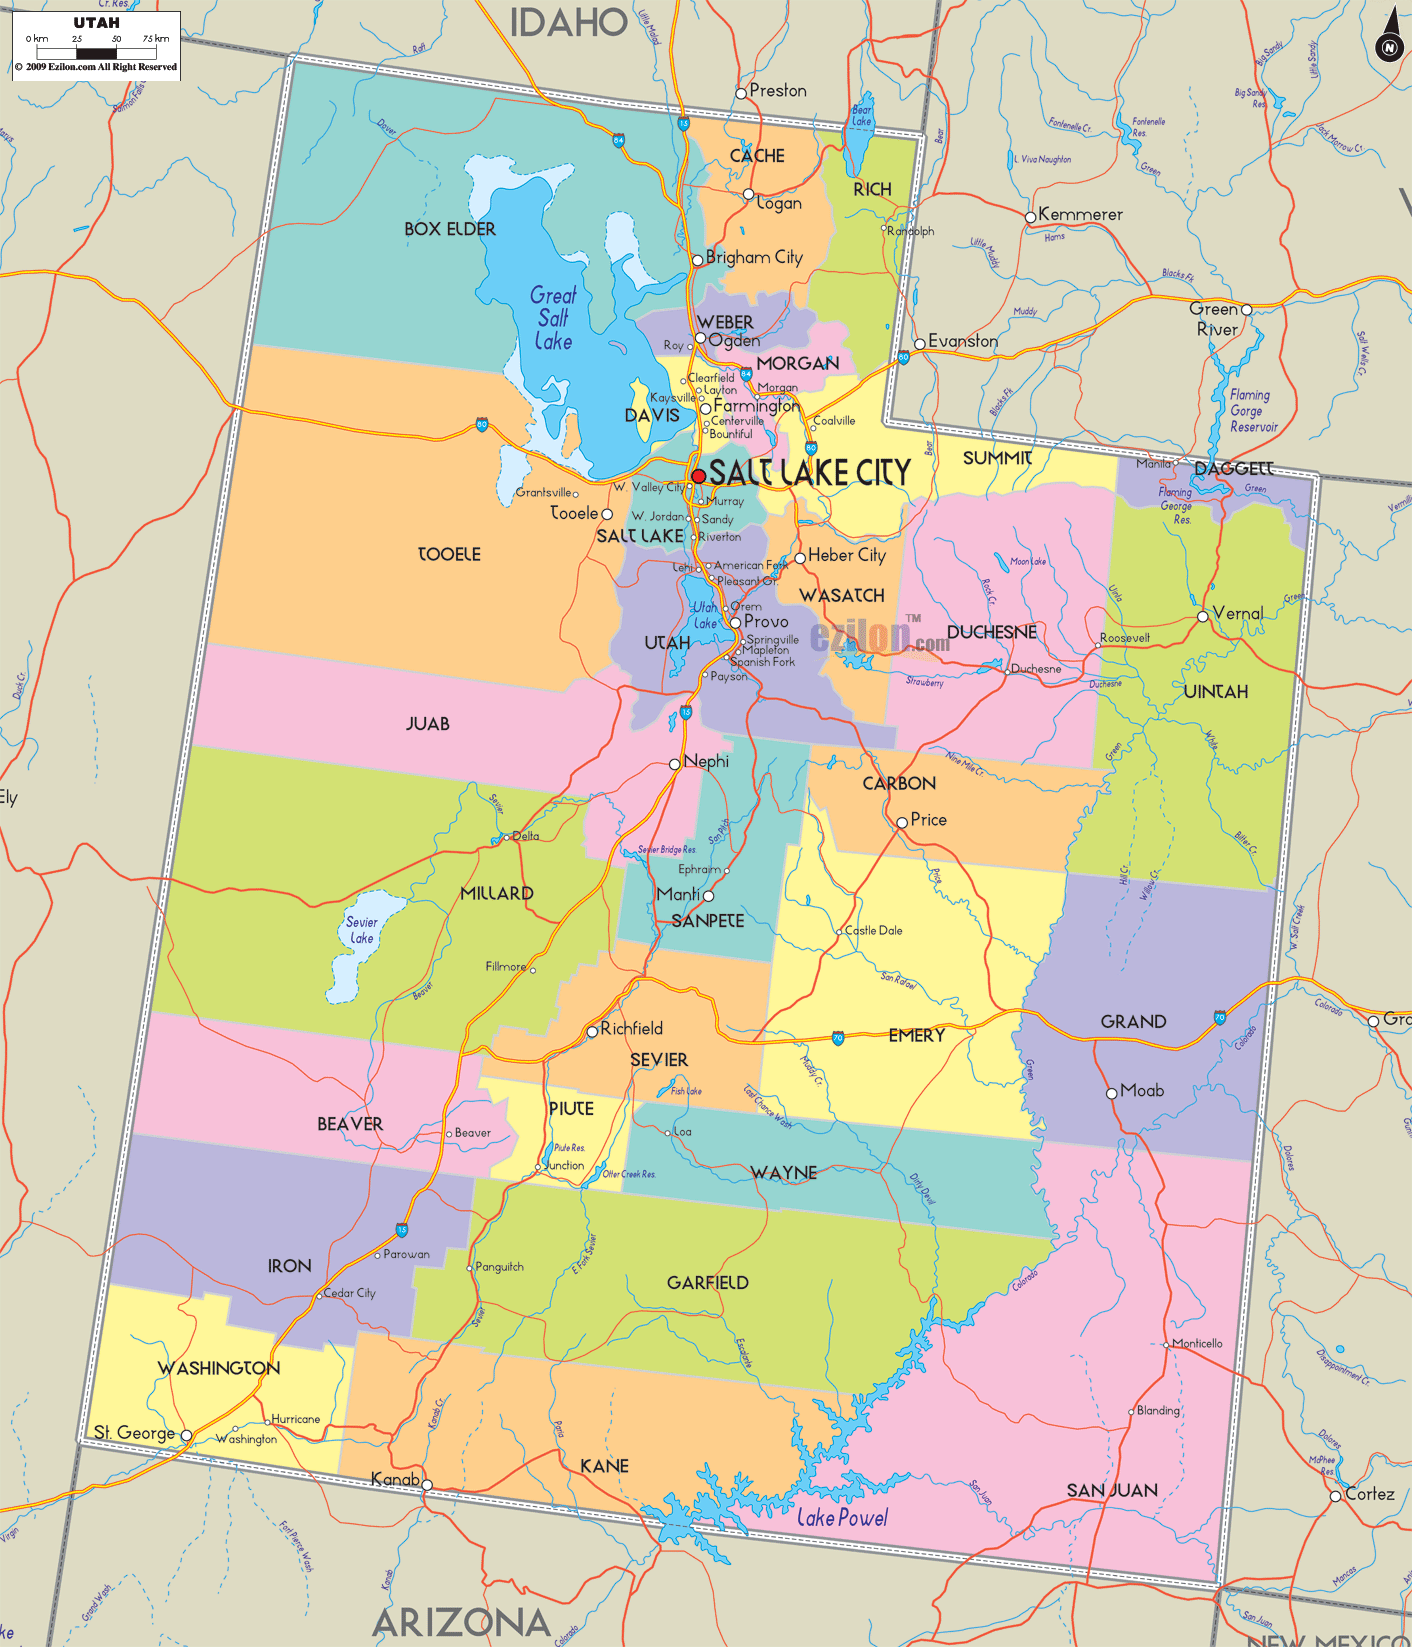 Illustrated map of Utah with county boundaries and labels